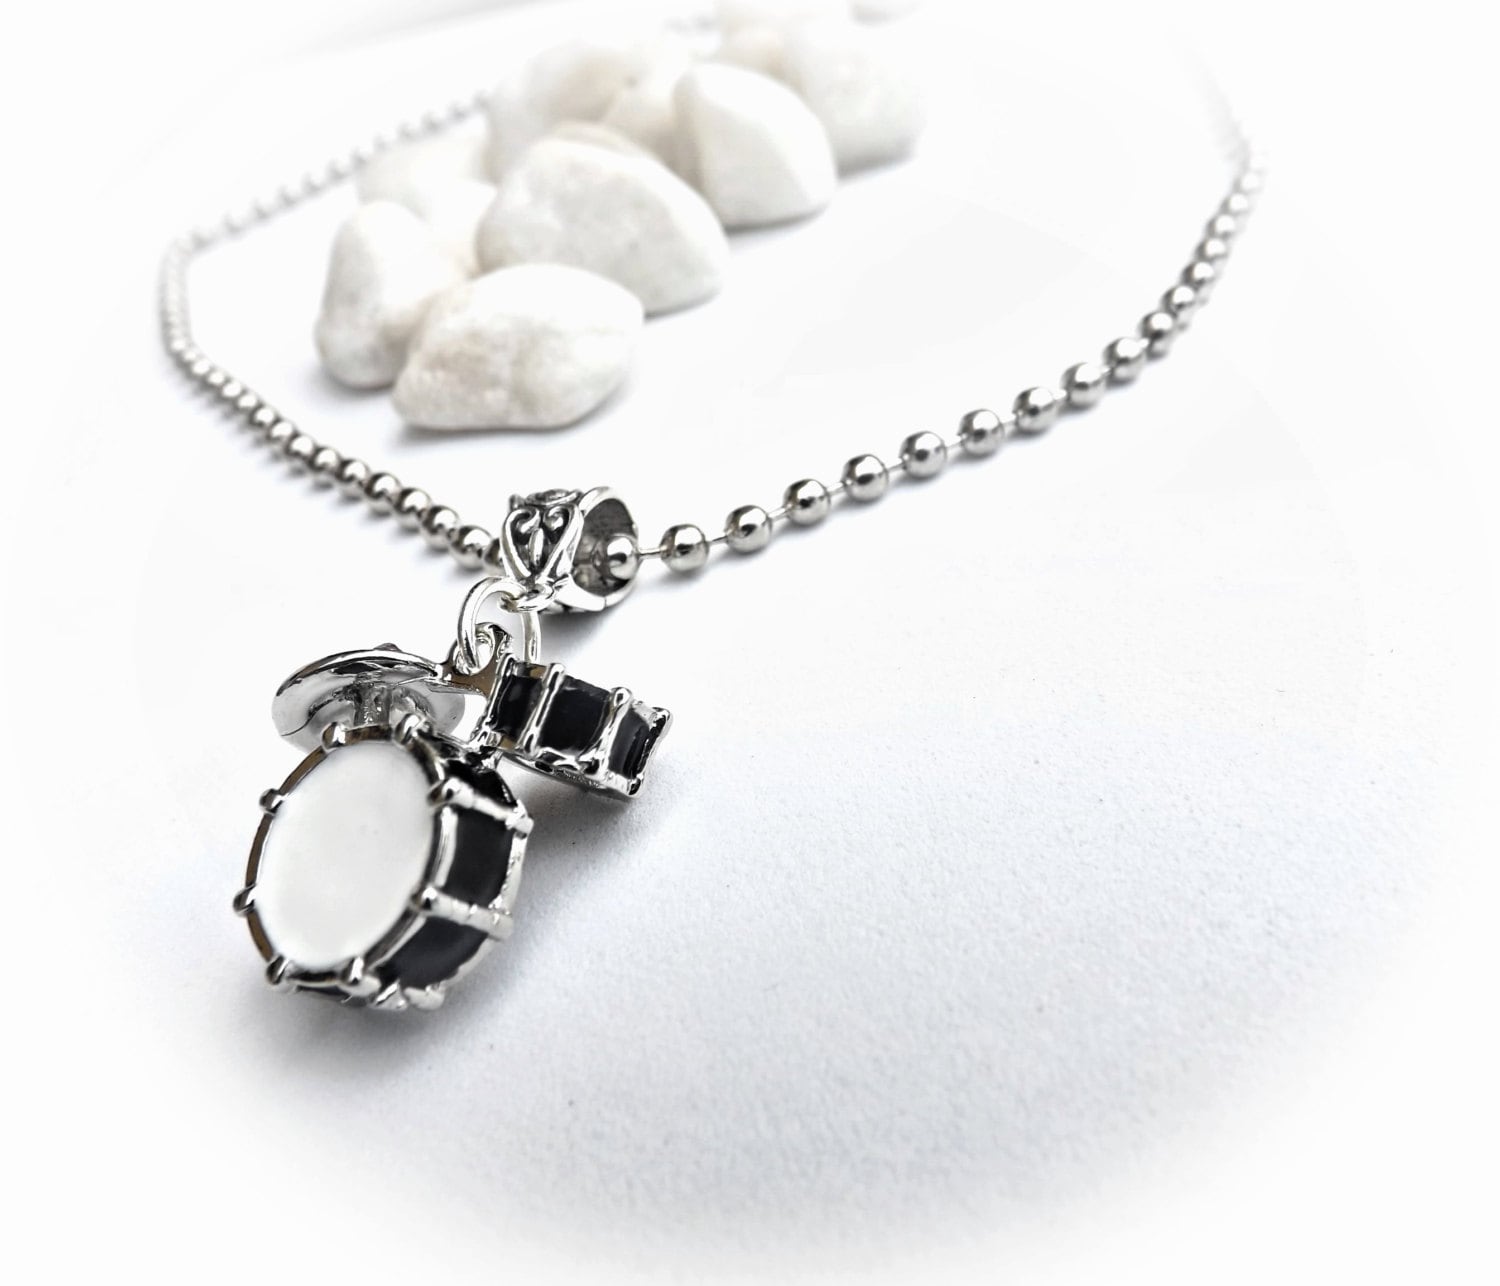 Awesome Black and White Drum Kit Necklace